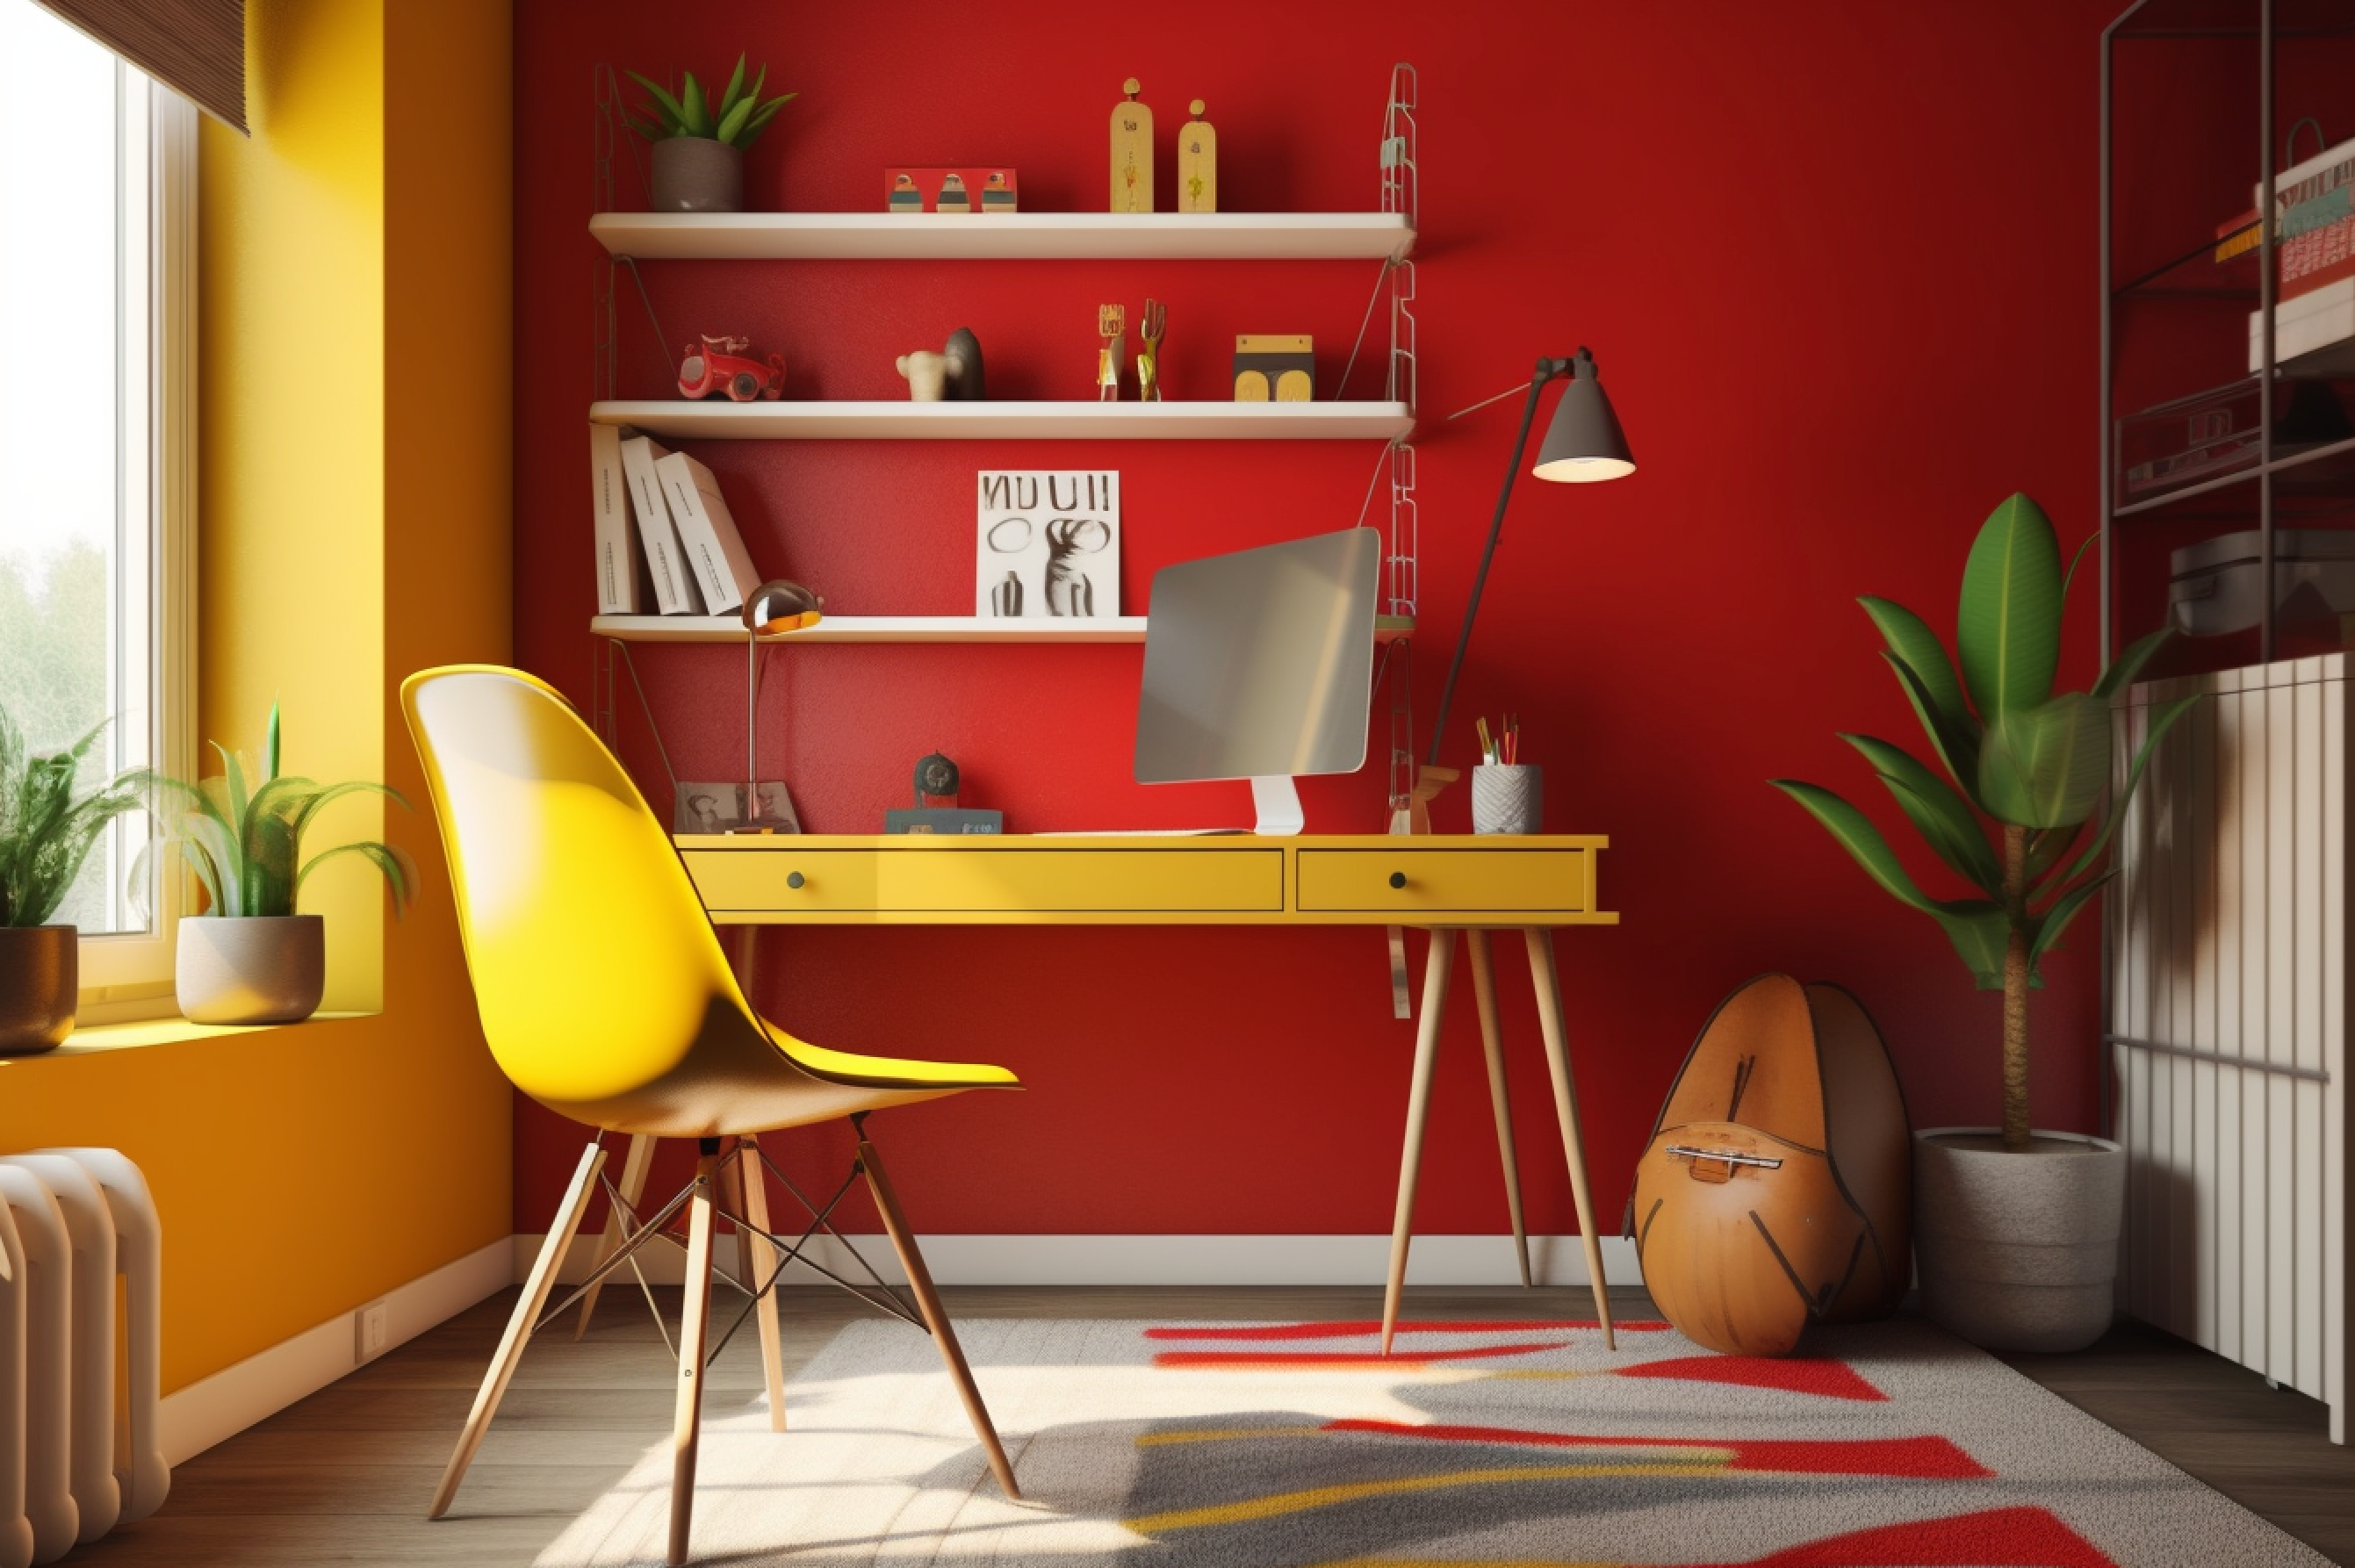 7. Red and Yellow Color Scheme - Mid-century Modern Study Room